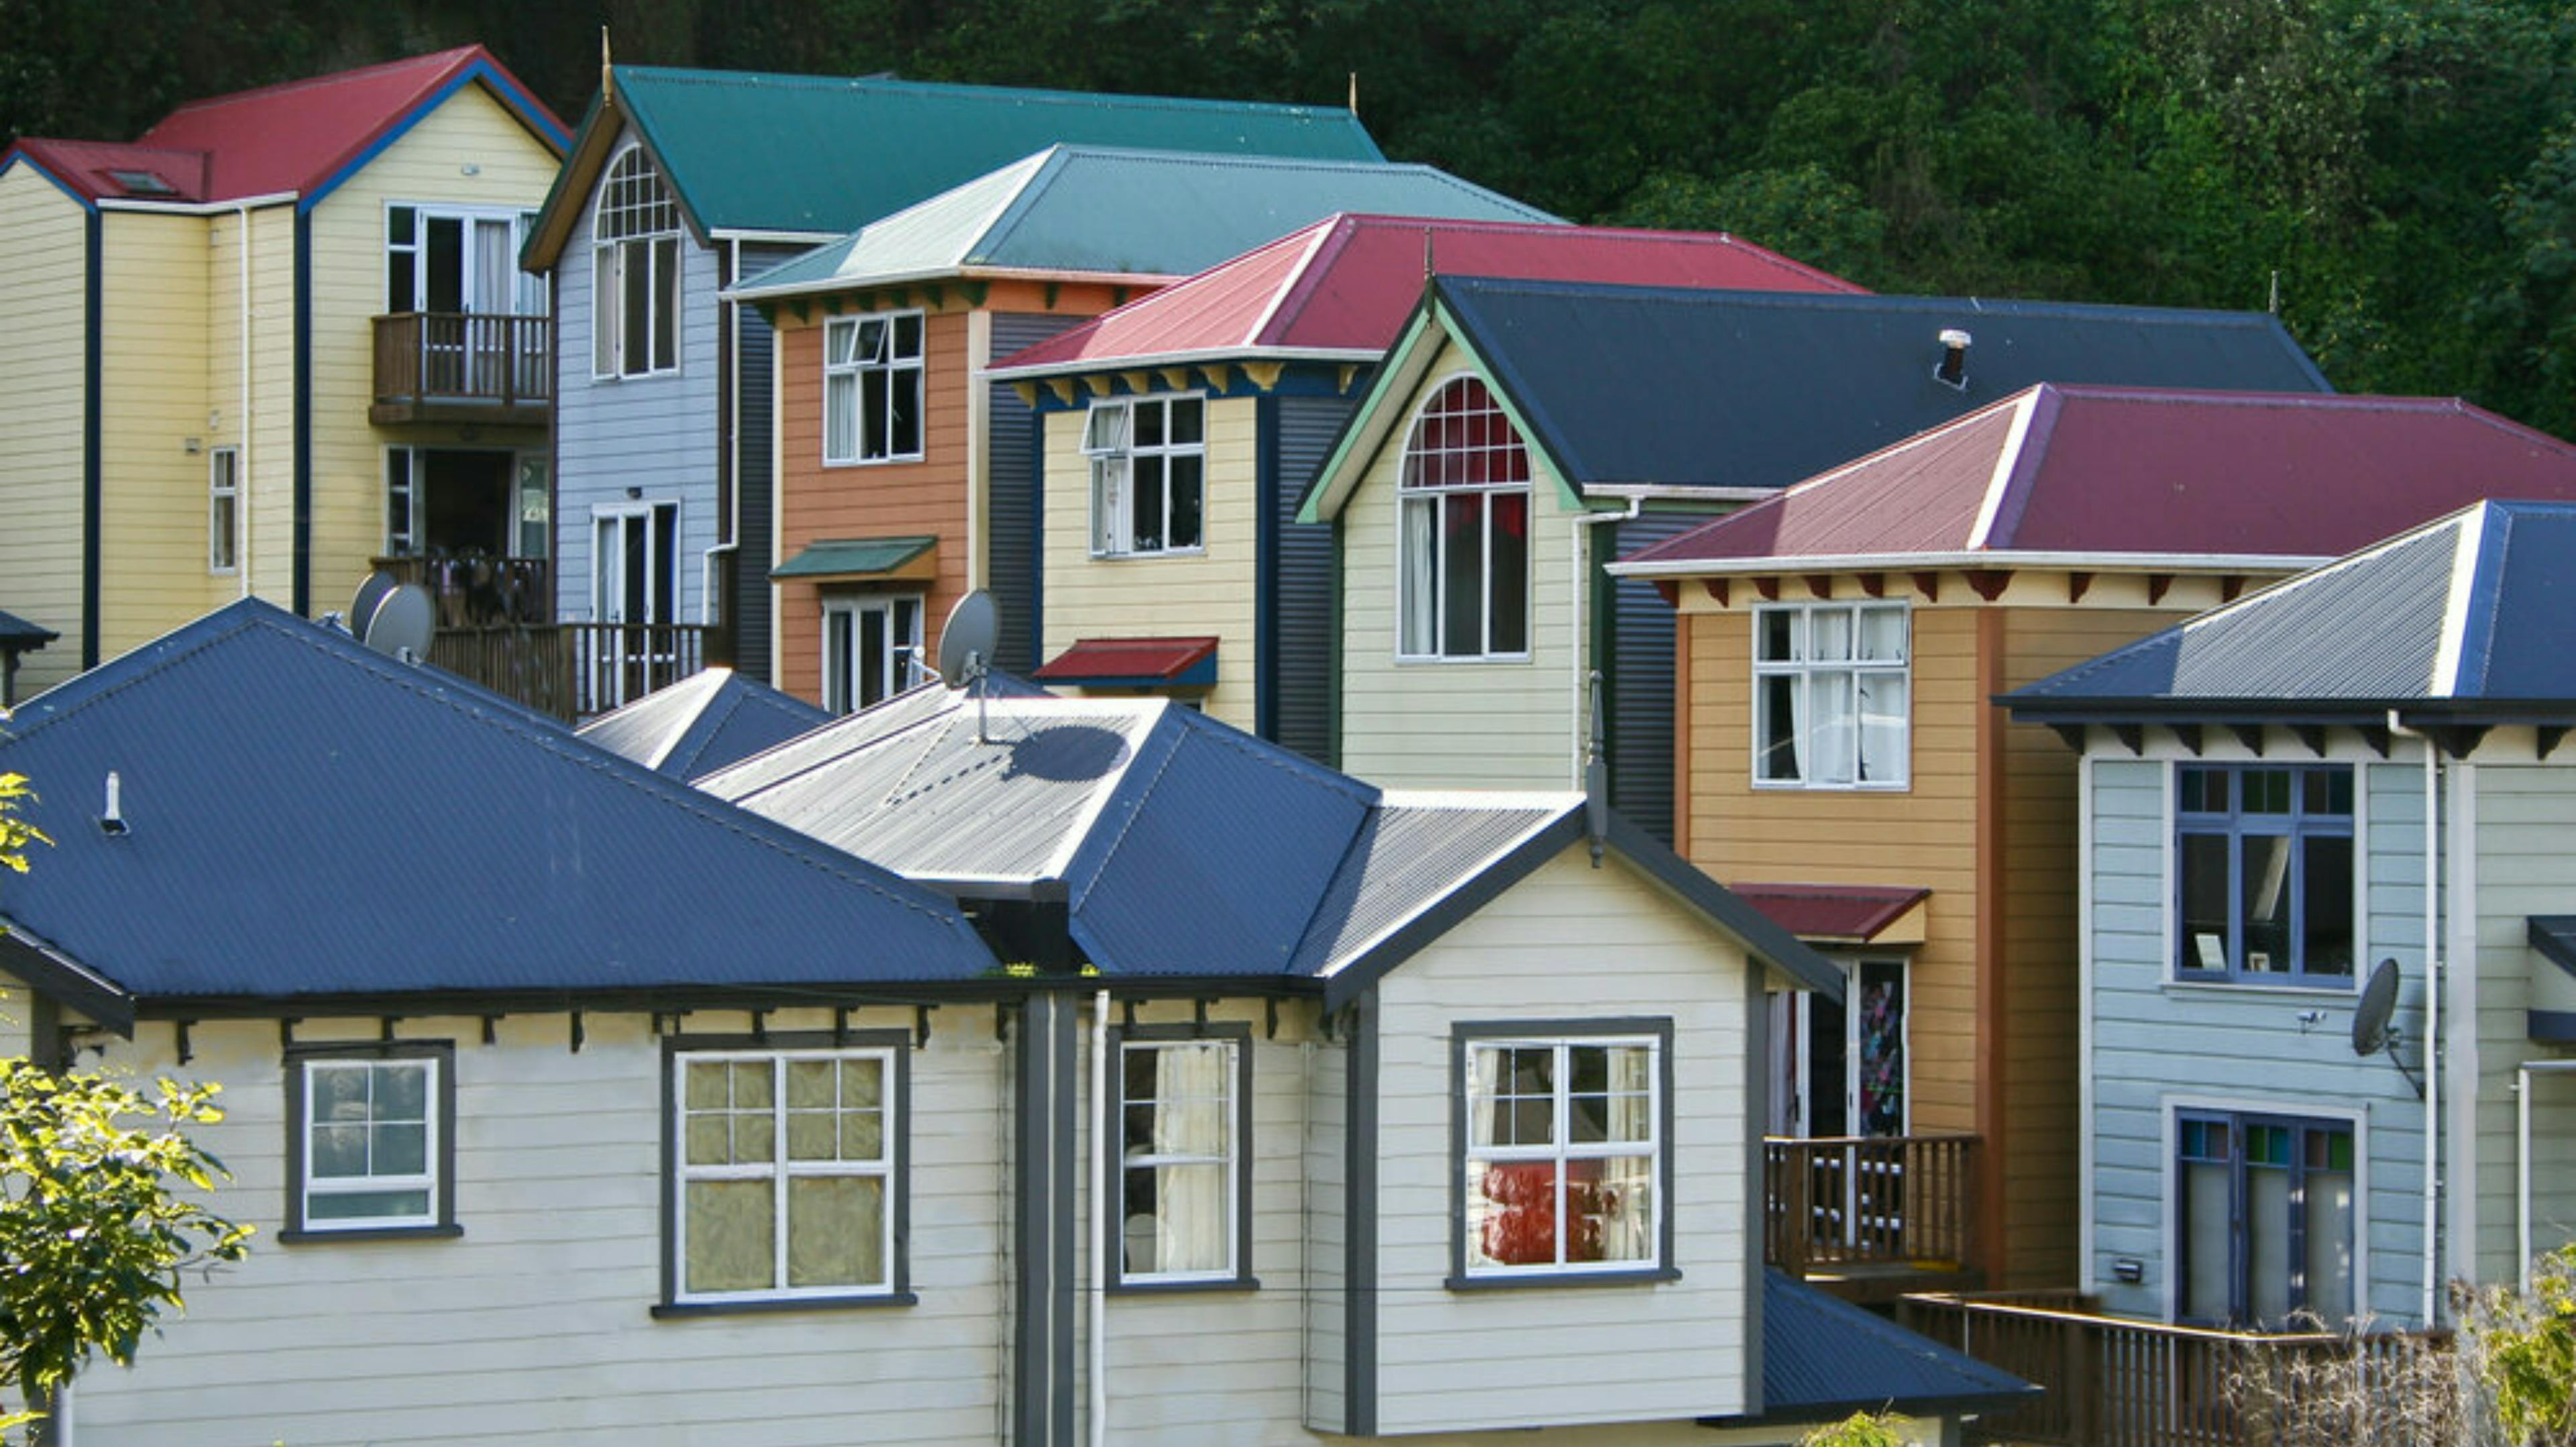 House Prices To Keep Going Up, Predicts KiwiBank